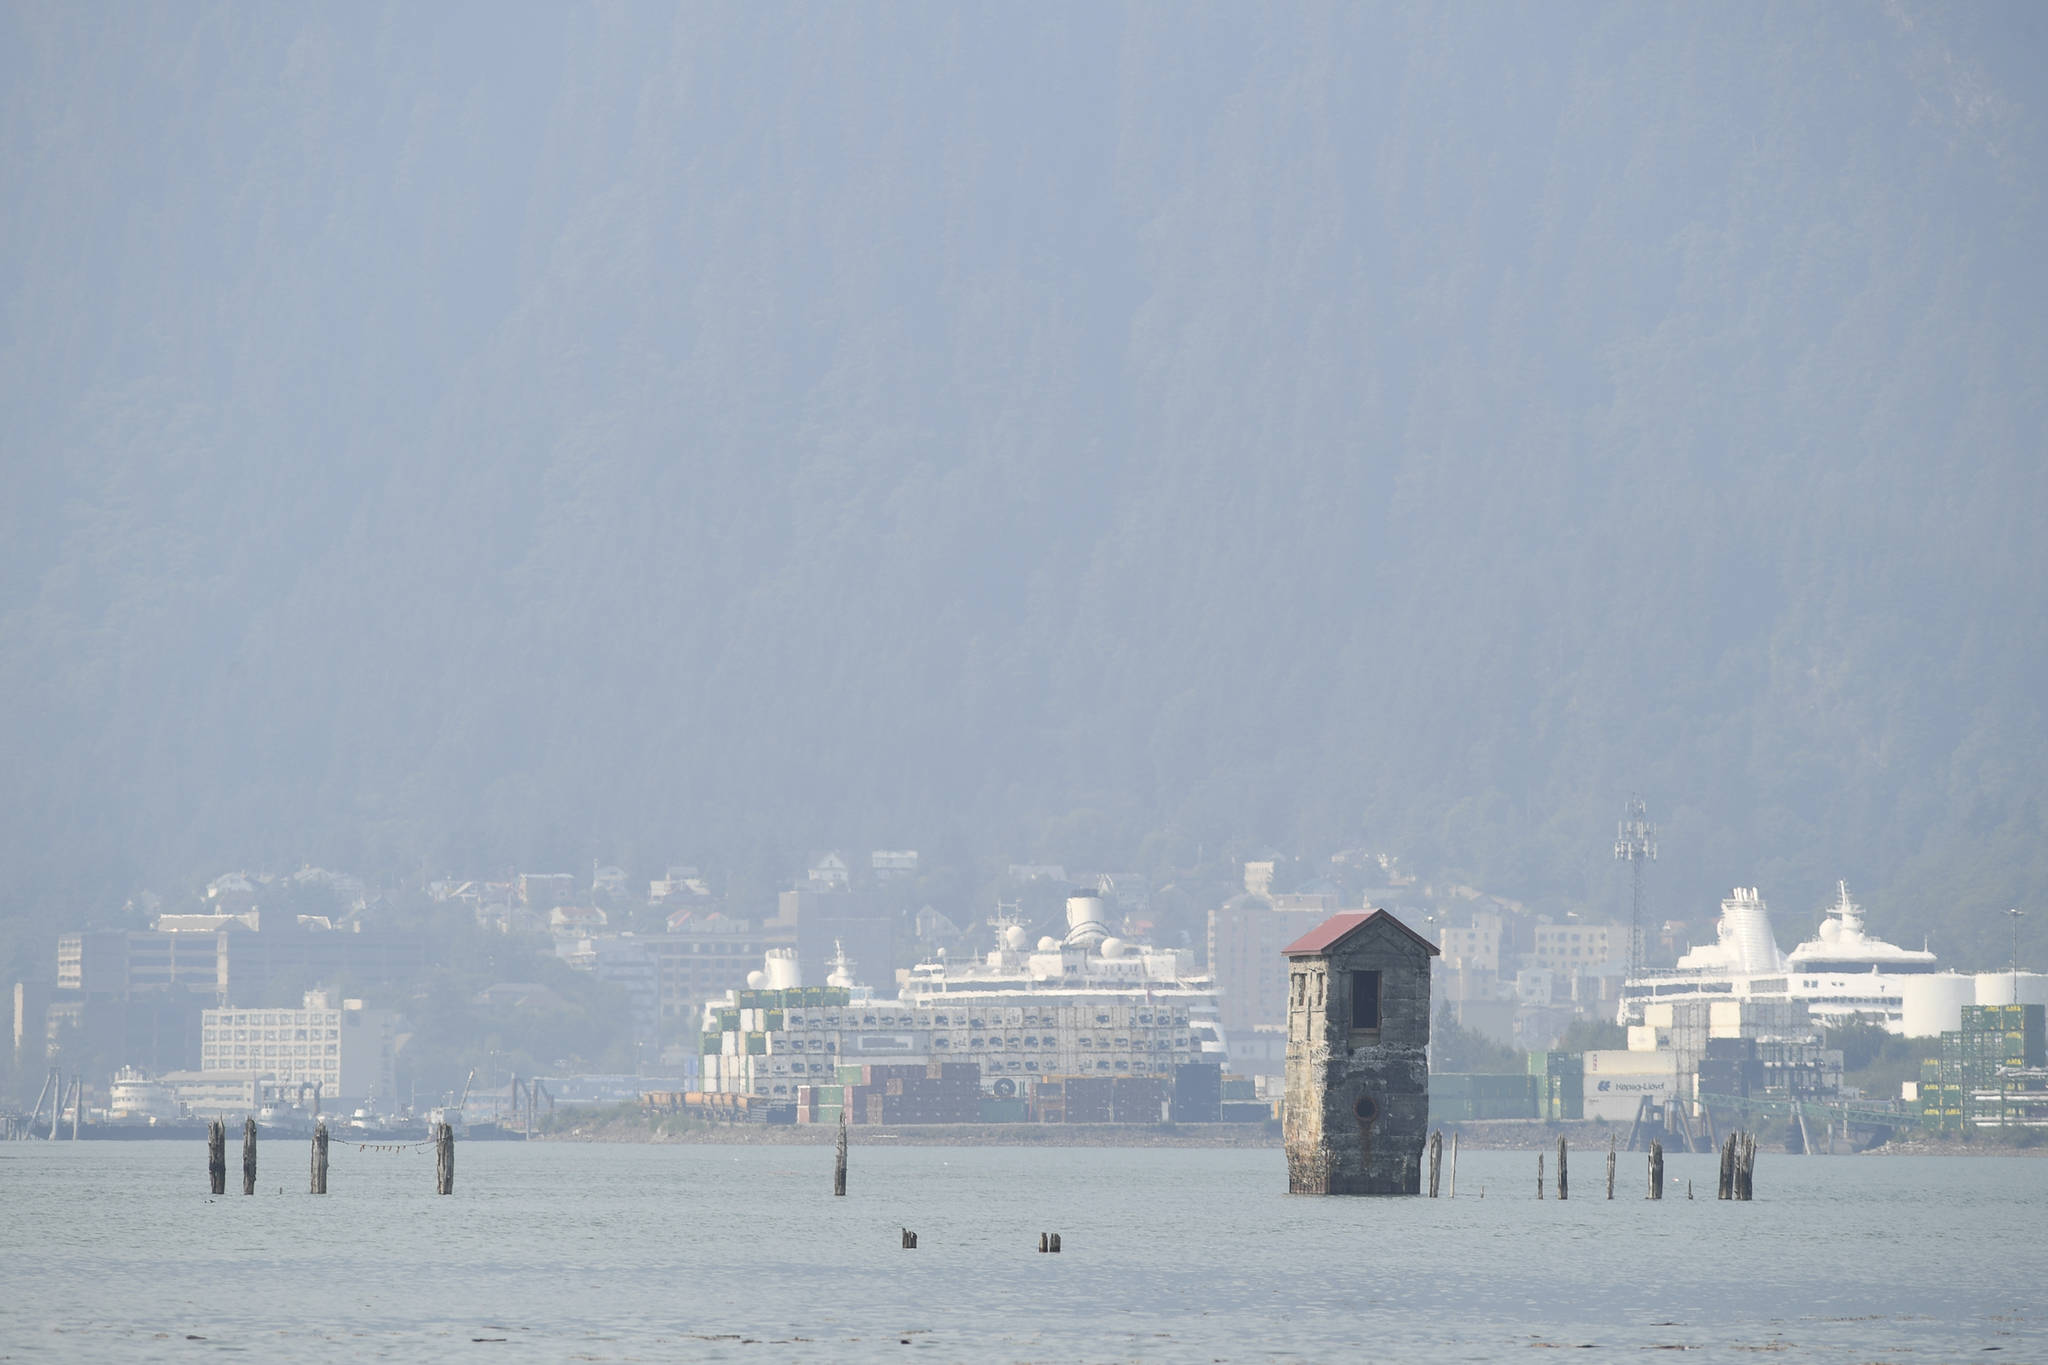 What the haze? Here’s the deal with all the smoke in Juneau right now